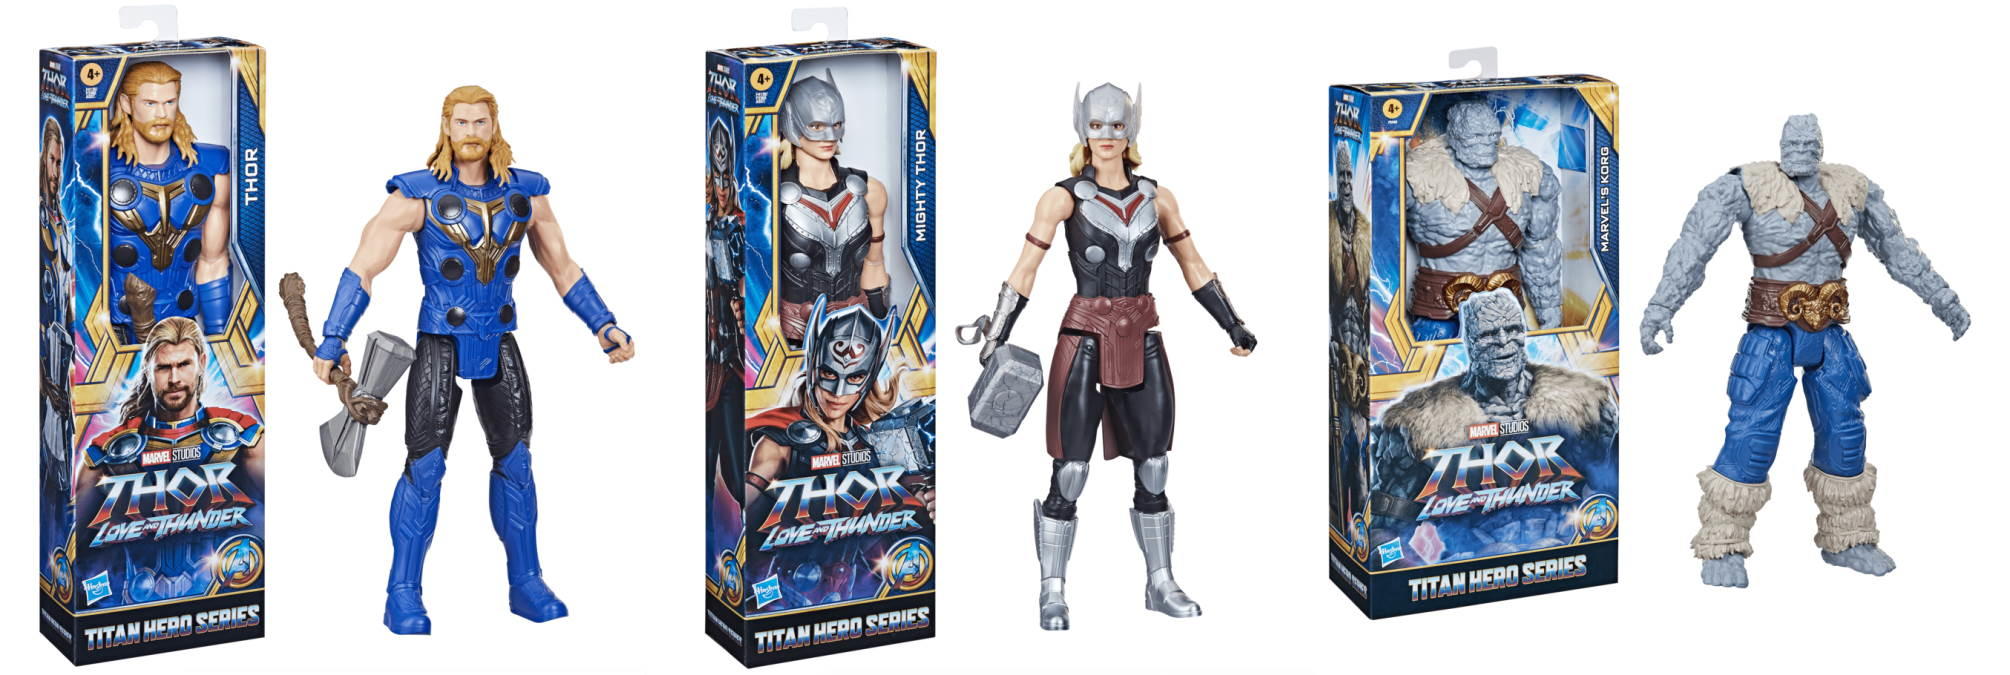 THOR: LOVE AND THUNDER toys reveal first look at Christian Bale's Gorr, the  God Butcher